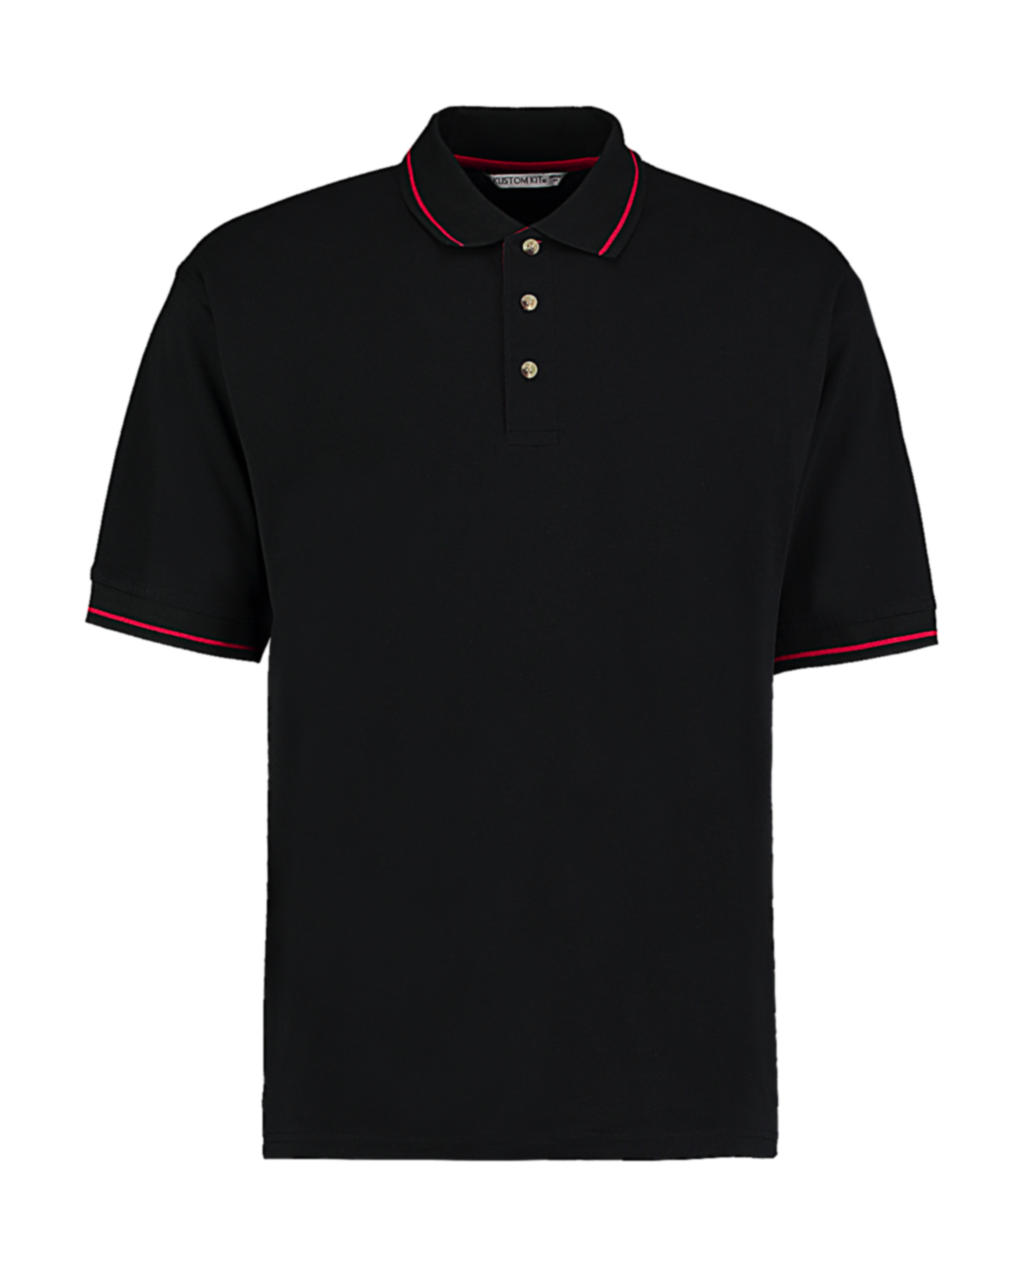  Mens Classic Fit St. Mellion Polo in Farbe Black/Red